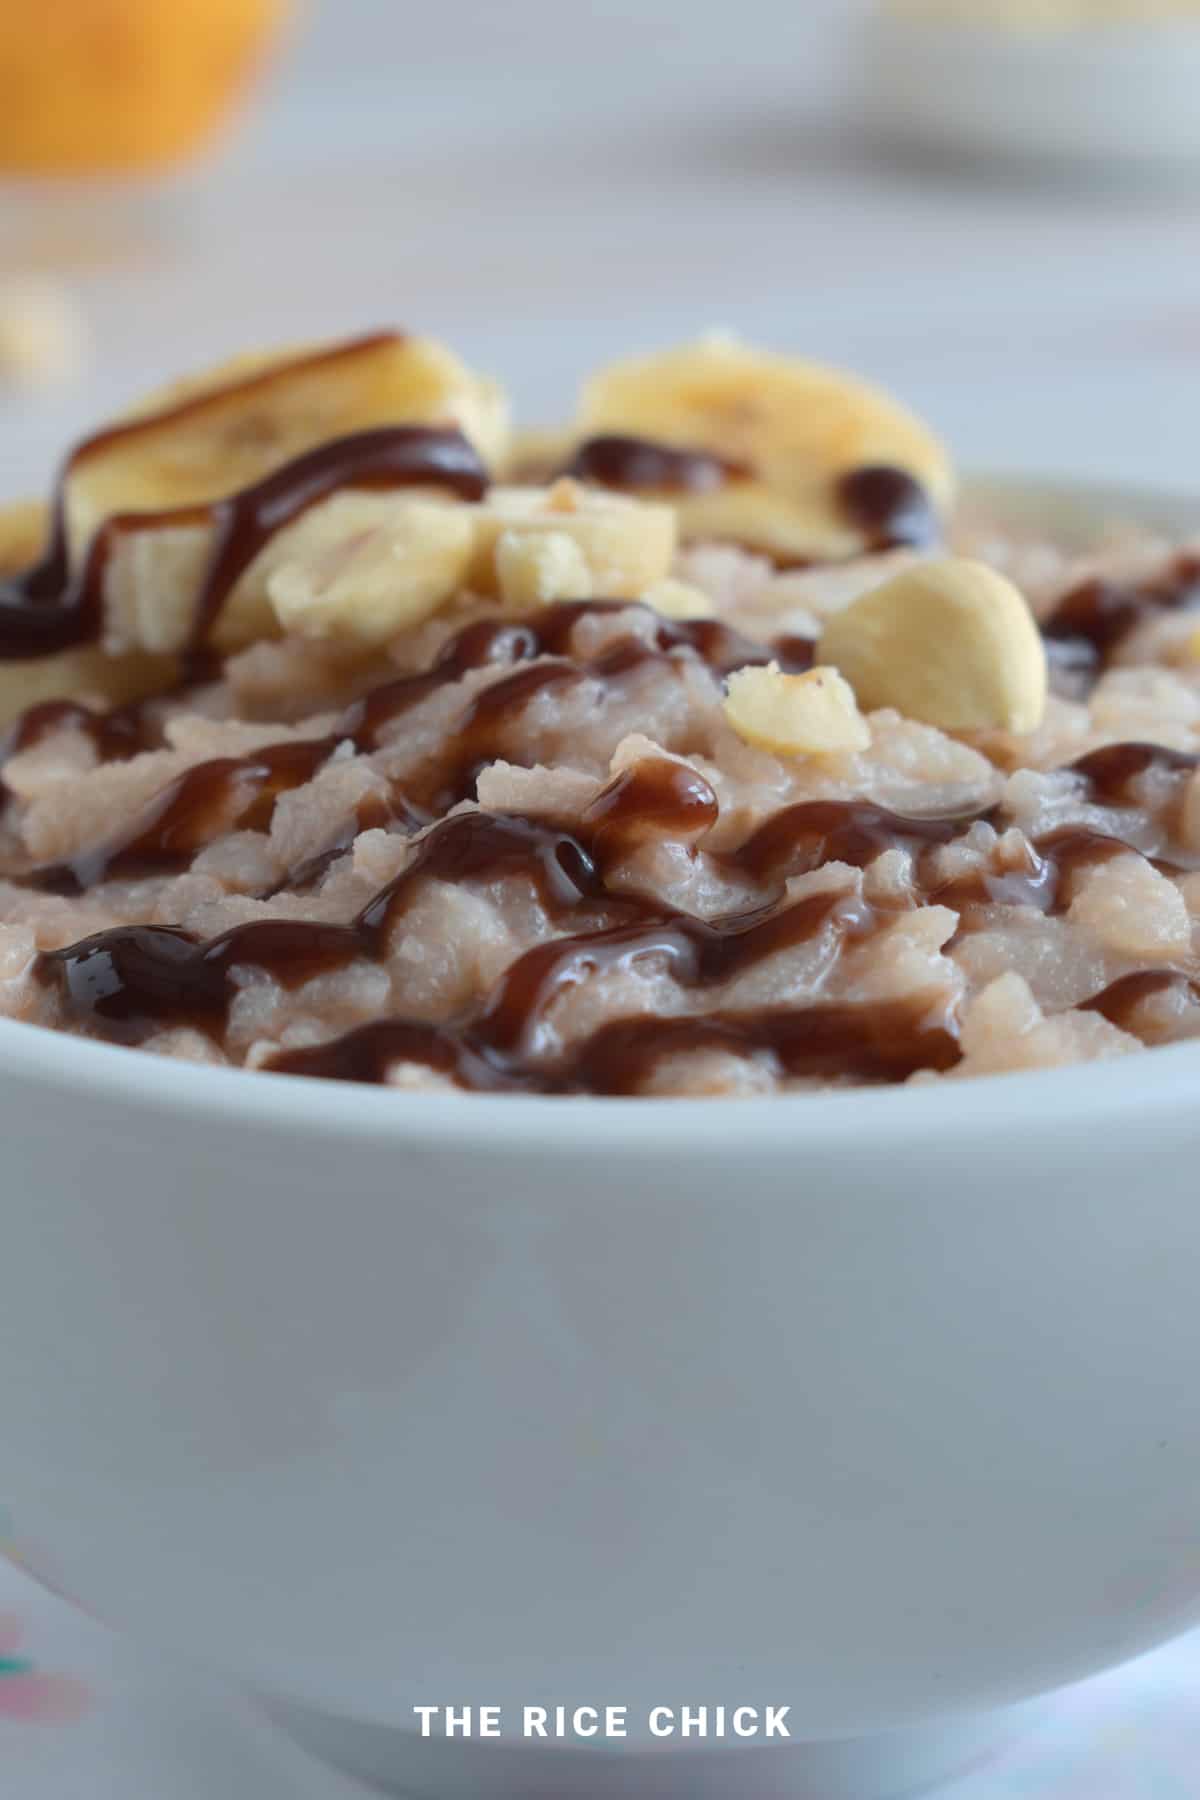 Nutella rice flakes porridge with chocolate sauce, chopped nuts, and sliced banana in a white bowl.